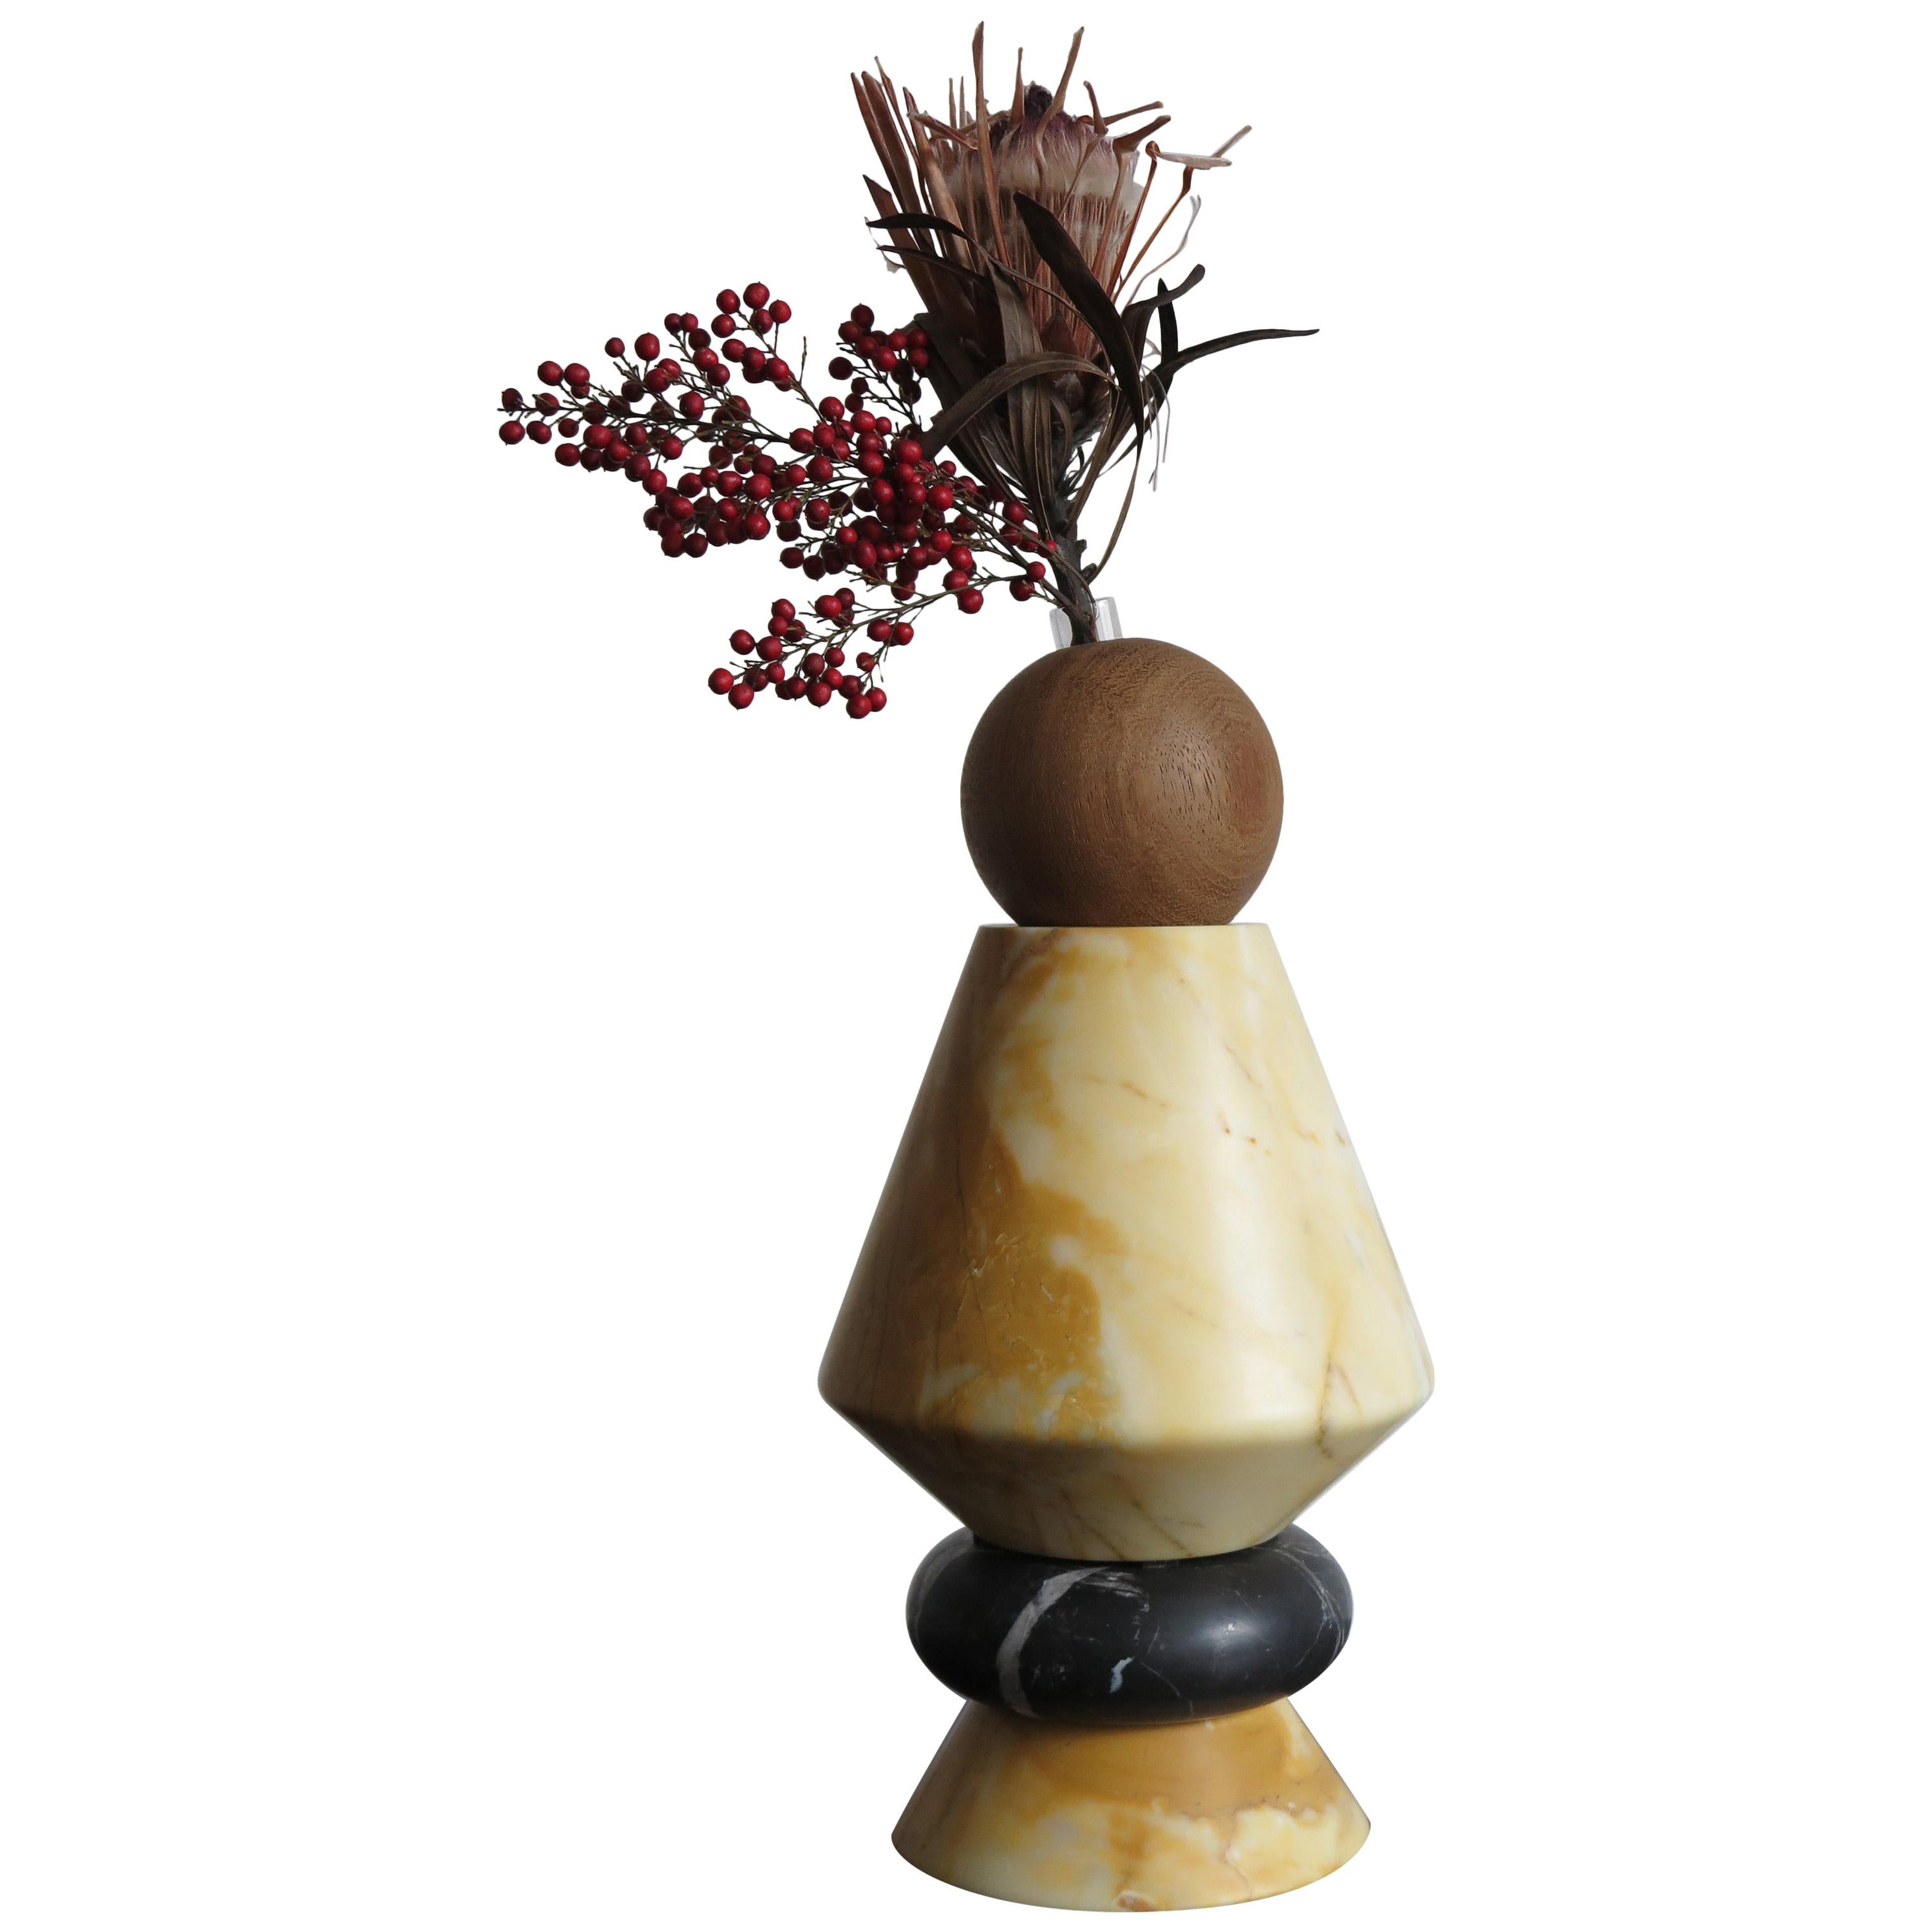 Marble and Wood Contemporary Sculpture, Candleholders, Flower Vase "iTotem"